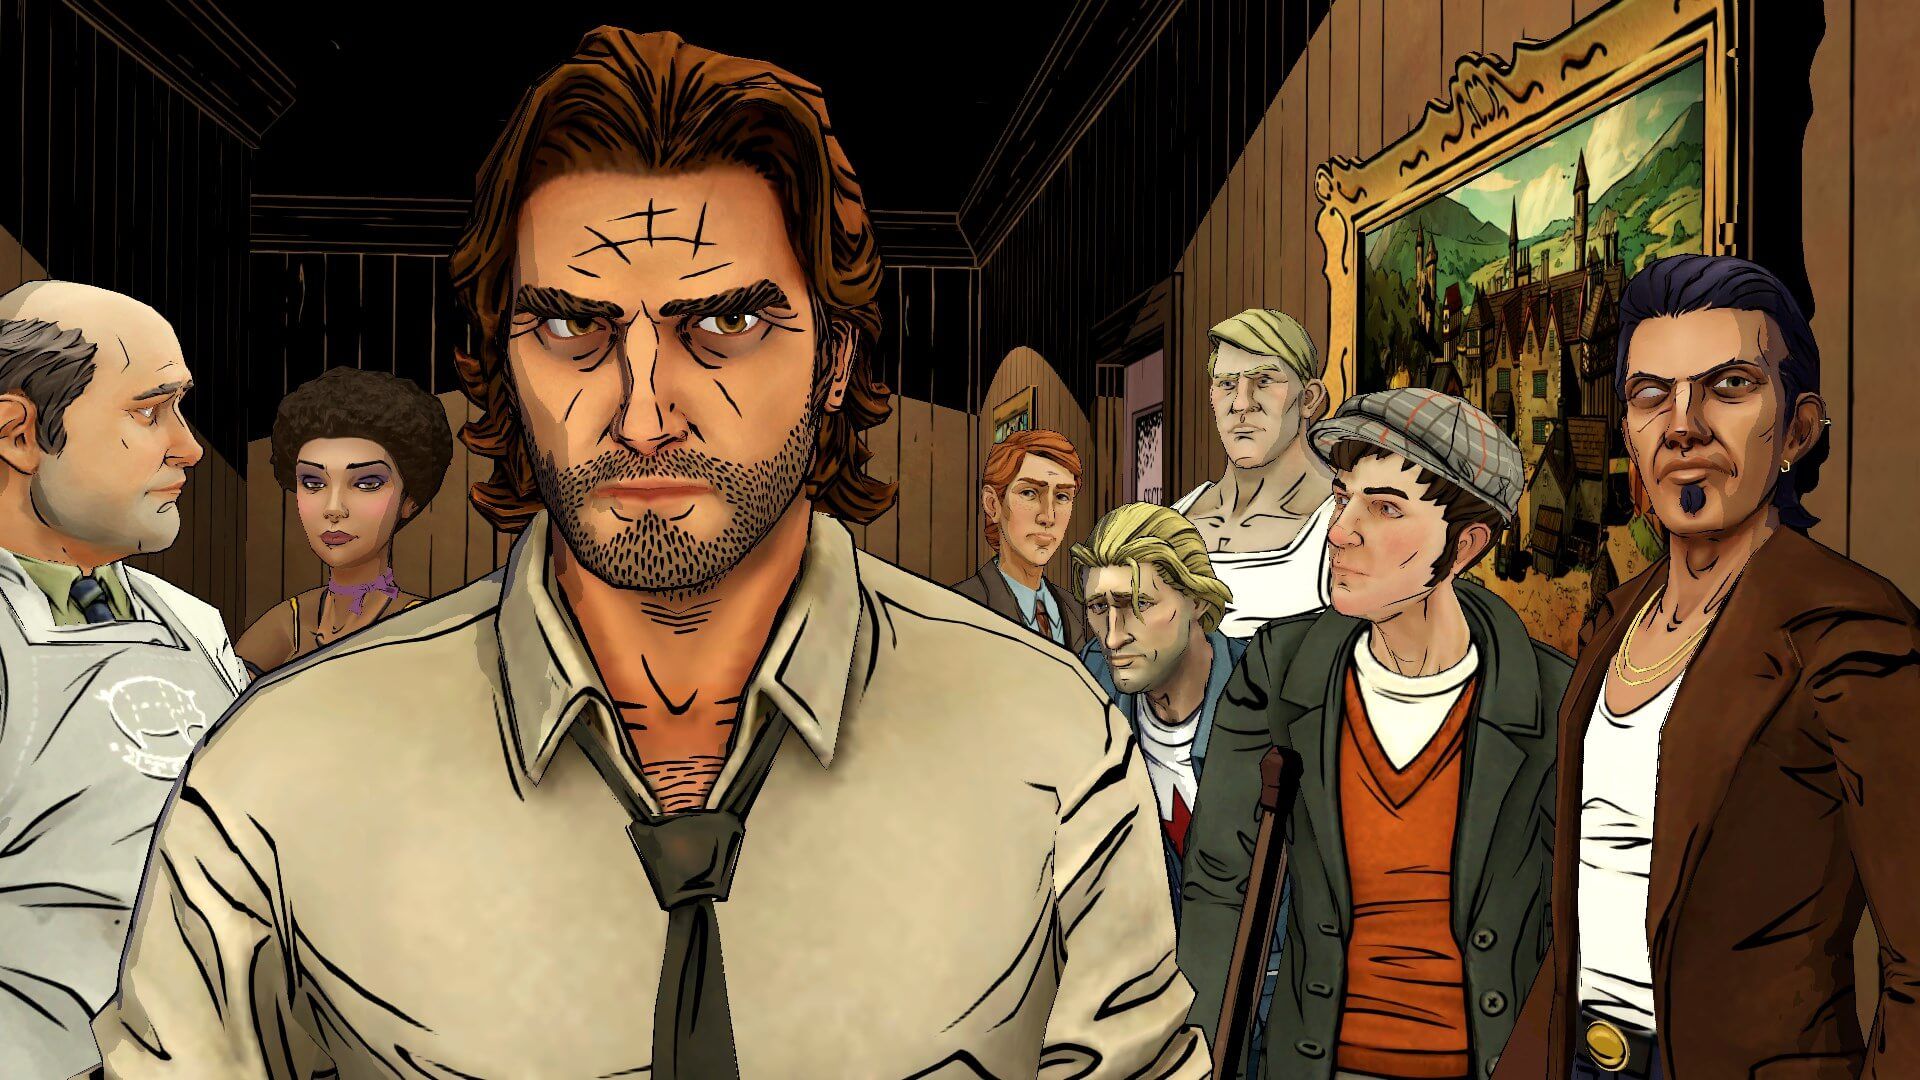 The Wolf Among Us download the new version for ipod